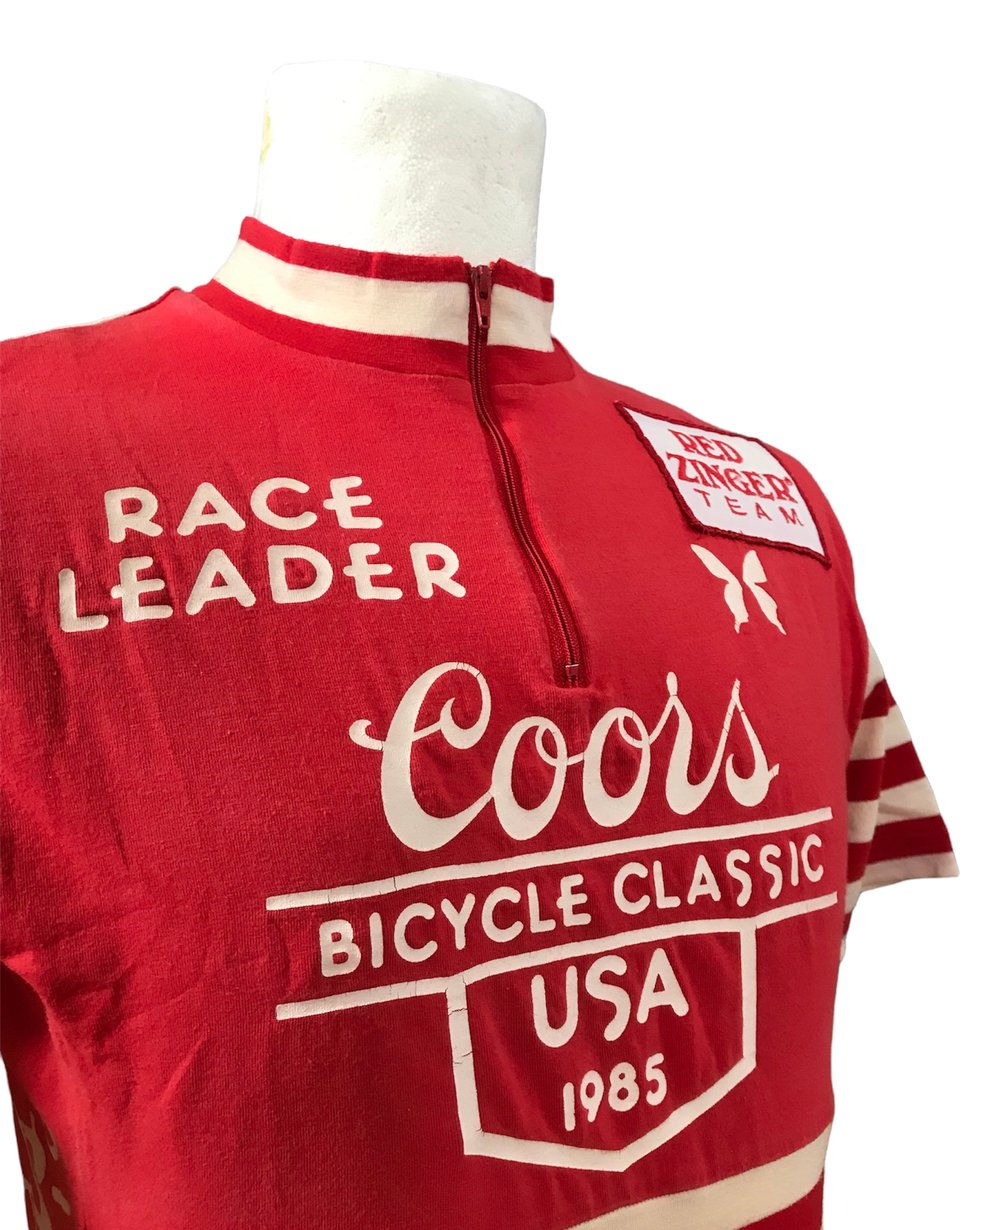 Steve Bauer ðŸ‡¨ðŸ‡¦ 1985 Leader's jersey worn at the Coors bicycle Classic